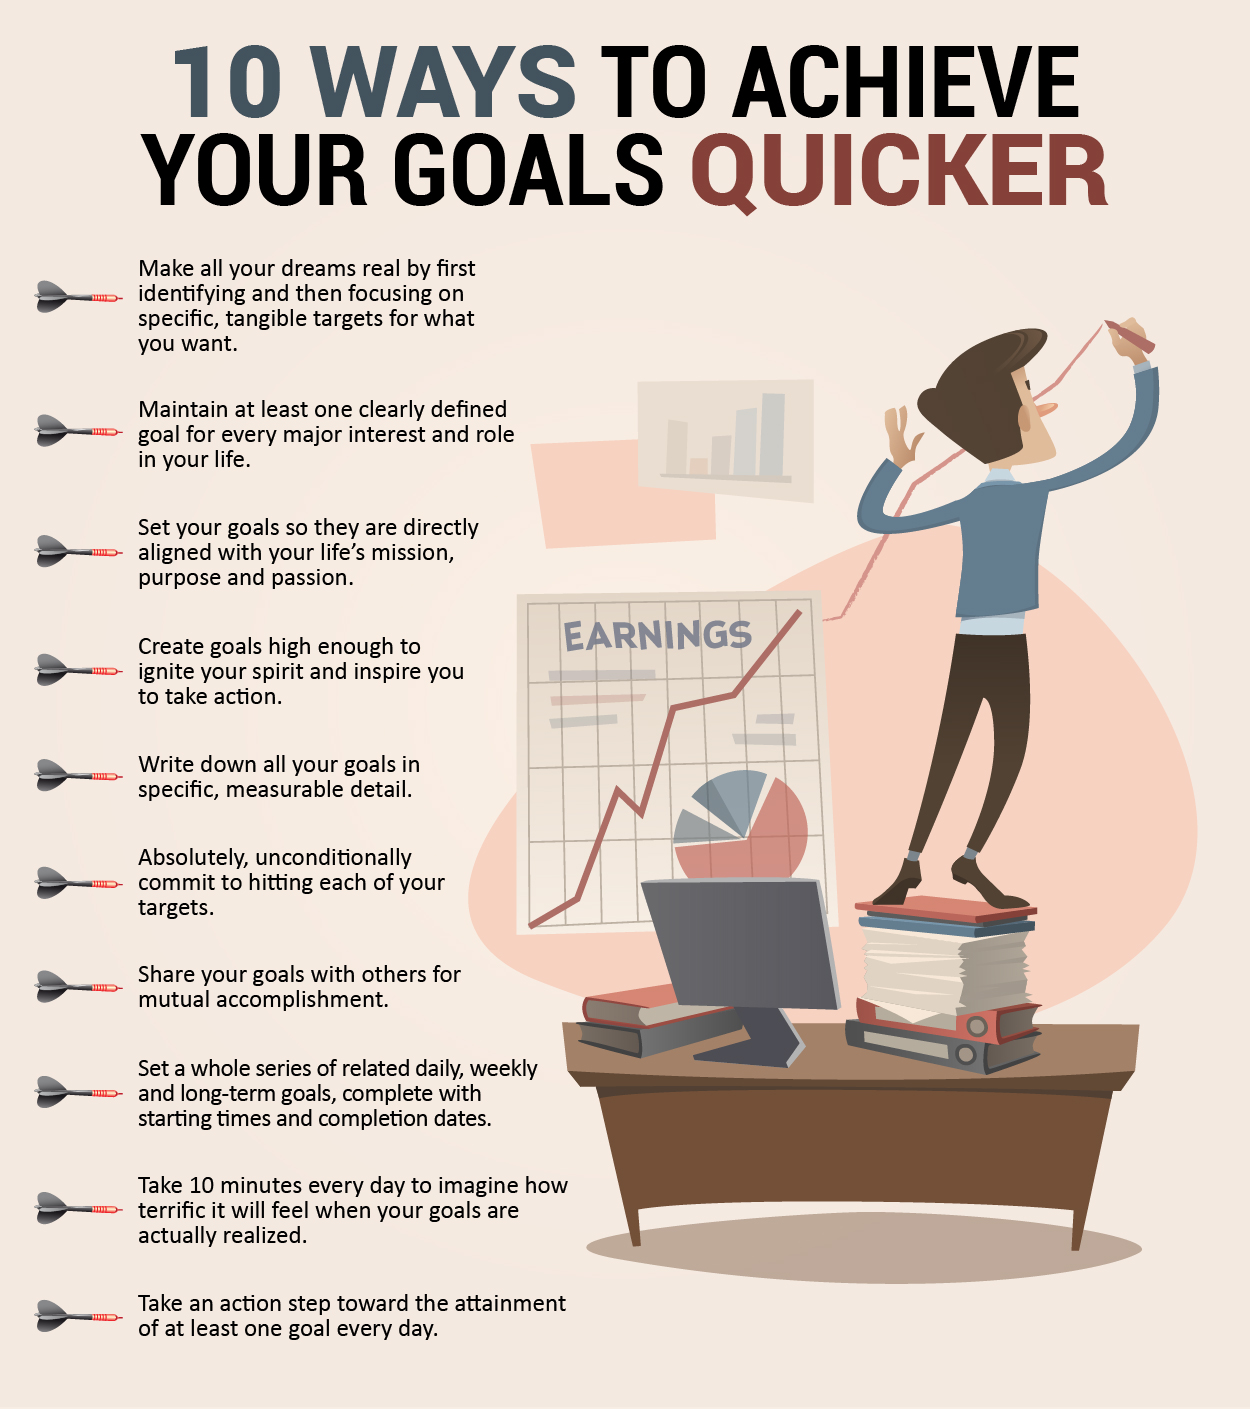 How To Reach Your Goals Quickly 10 Easy Ways Visually 2572